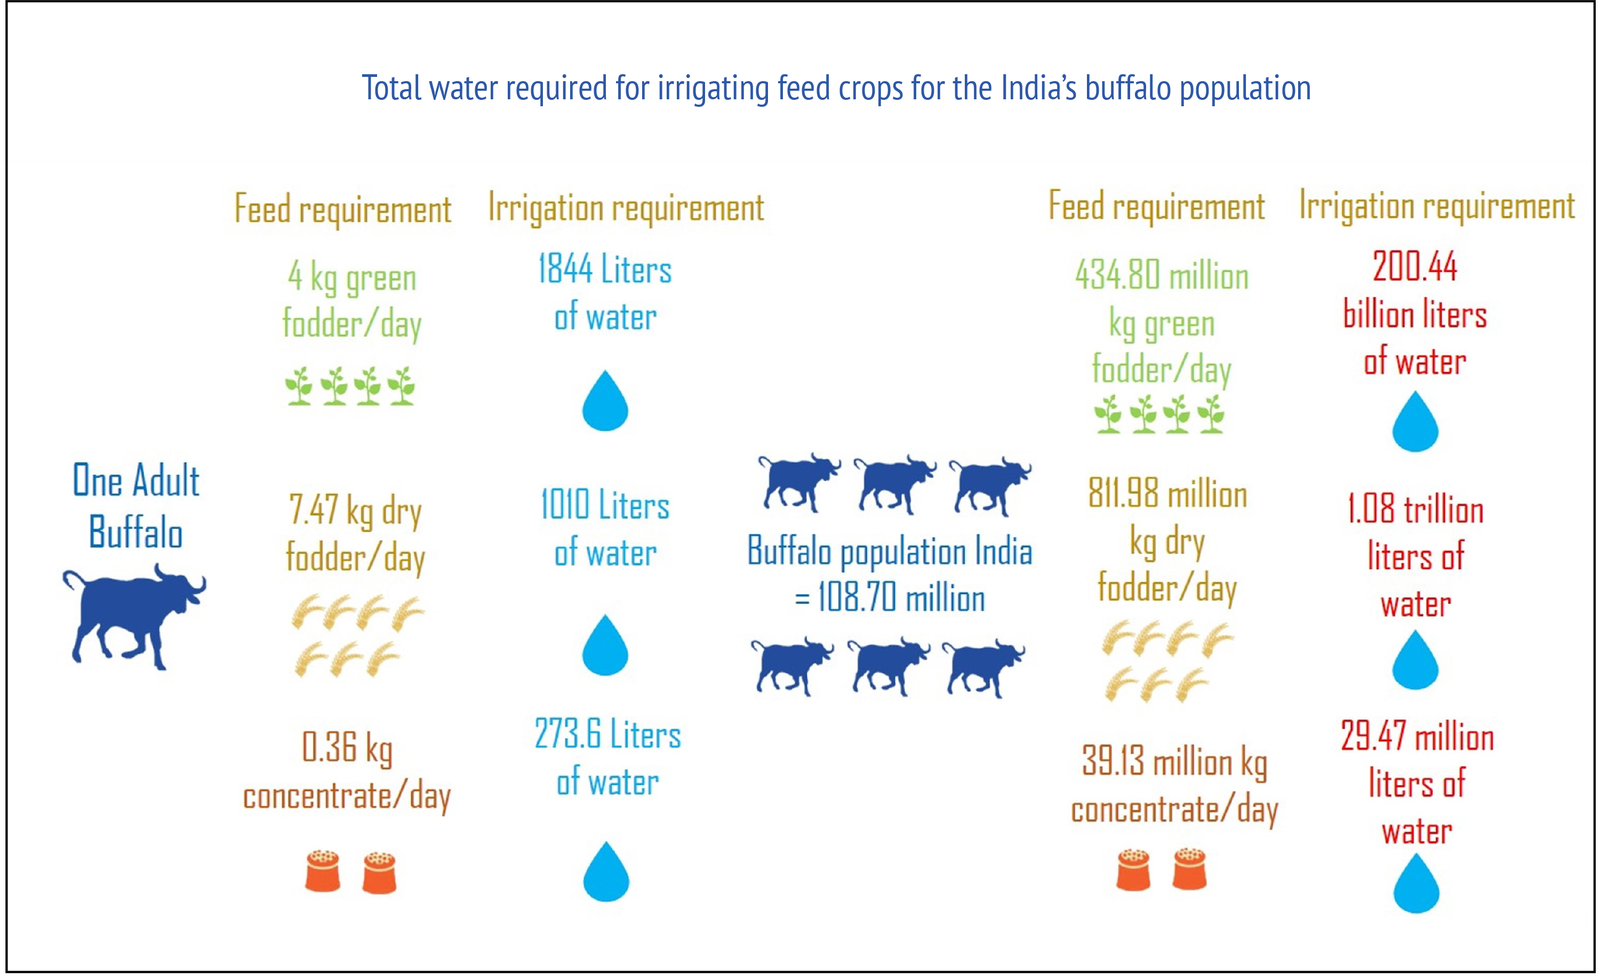 The&#x20;feed&#x20;requirement&#x20;for&#x20;an&#x20;adult&#x20;buffalo&#x20;with&#x20;respective&#x20;water&#x20;requirements&#x20;for&#x20;irrigation&#x20;was&#x20;used&#x20;for&#x20;estimating&#x20;water&#x20;requirements&#x20;for&#x20;the&#x20;total&#x20;buffalo&#x20;population&#x20;in&#x20;India